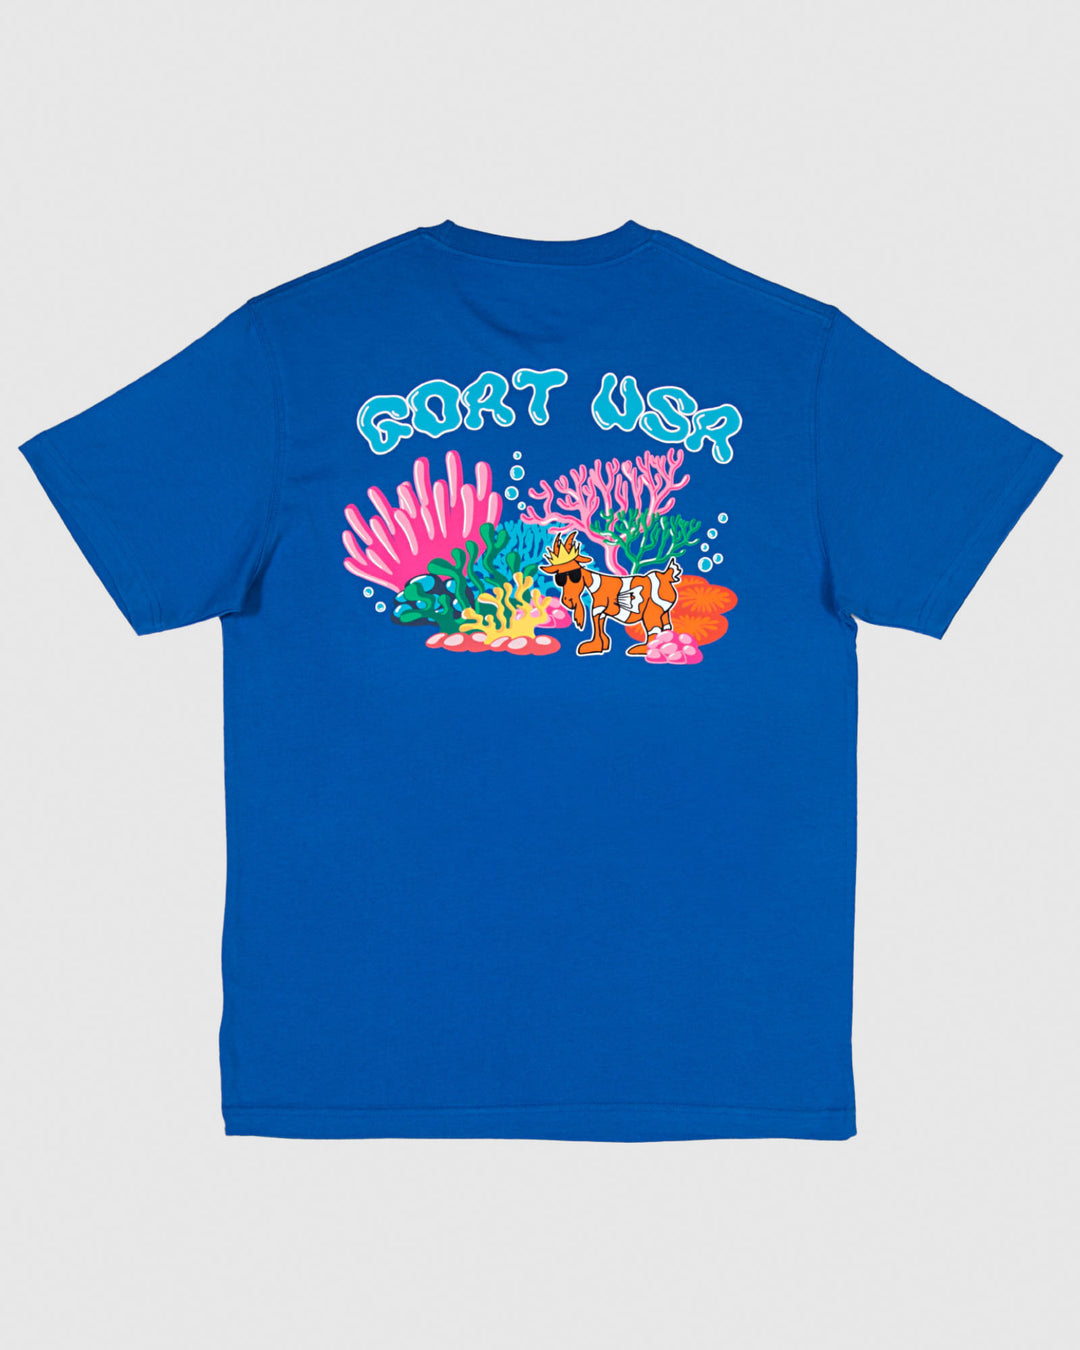 Back of royal t-shirt with reef design and clownfish goat